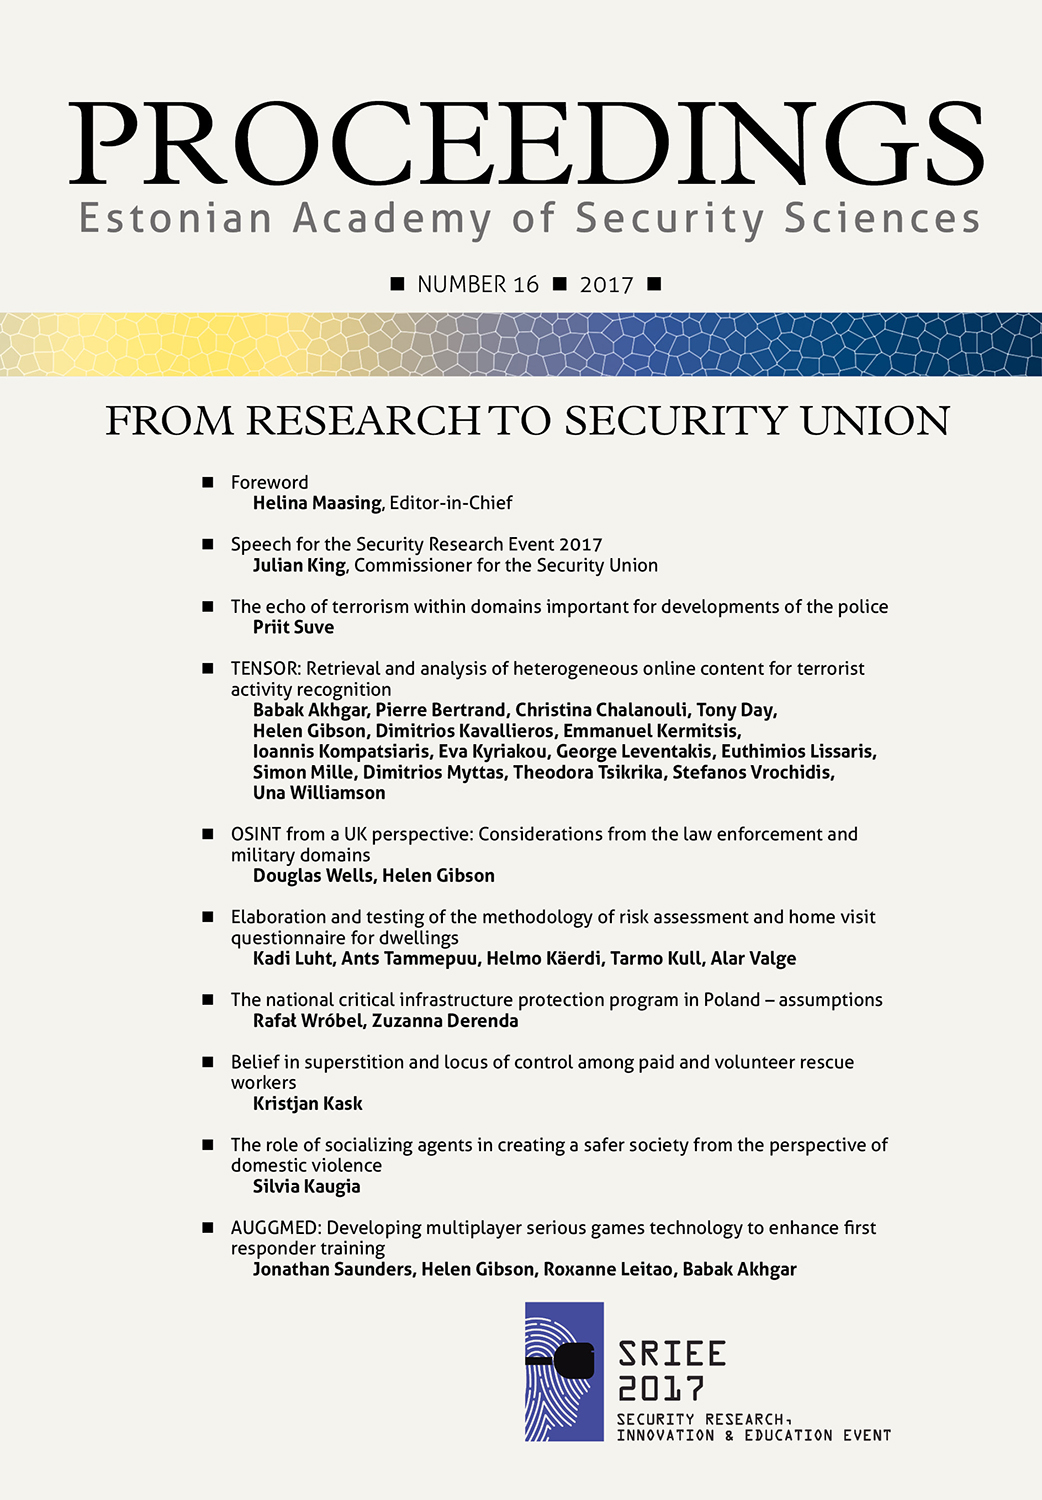 From Reasearch to Security Union